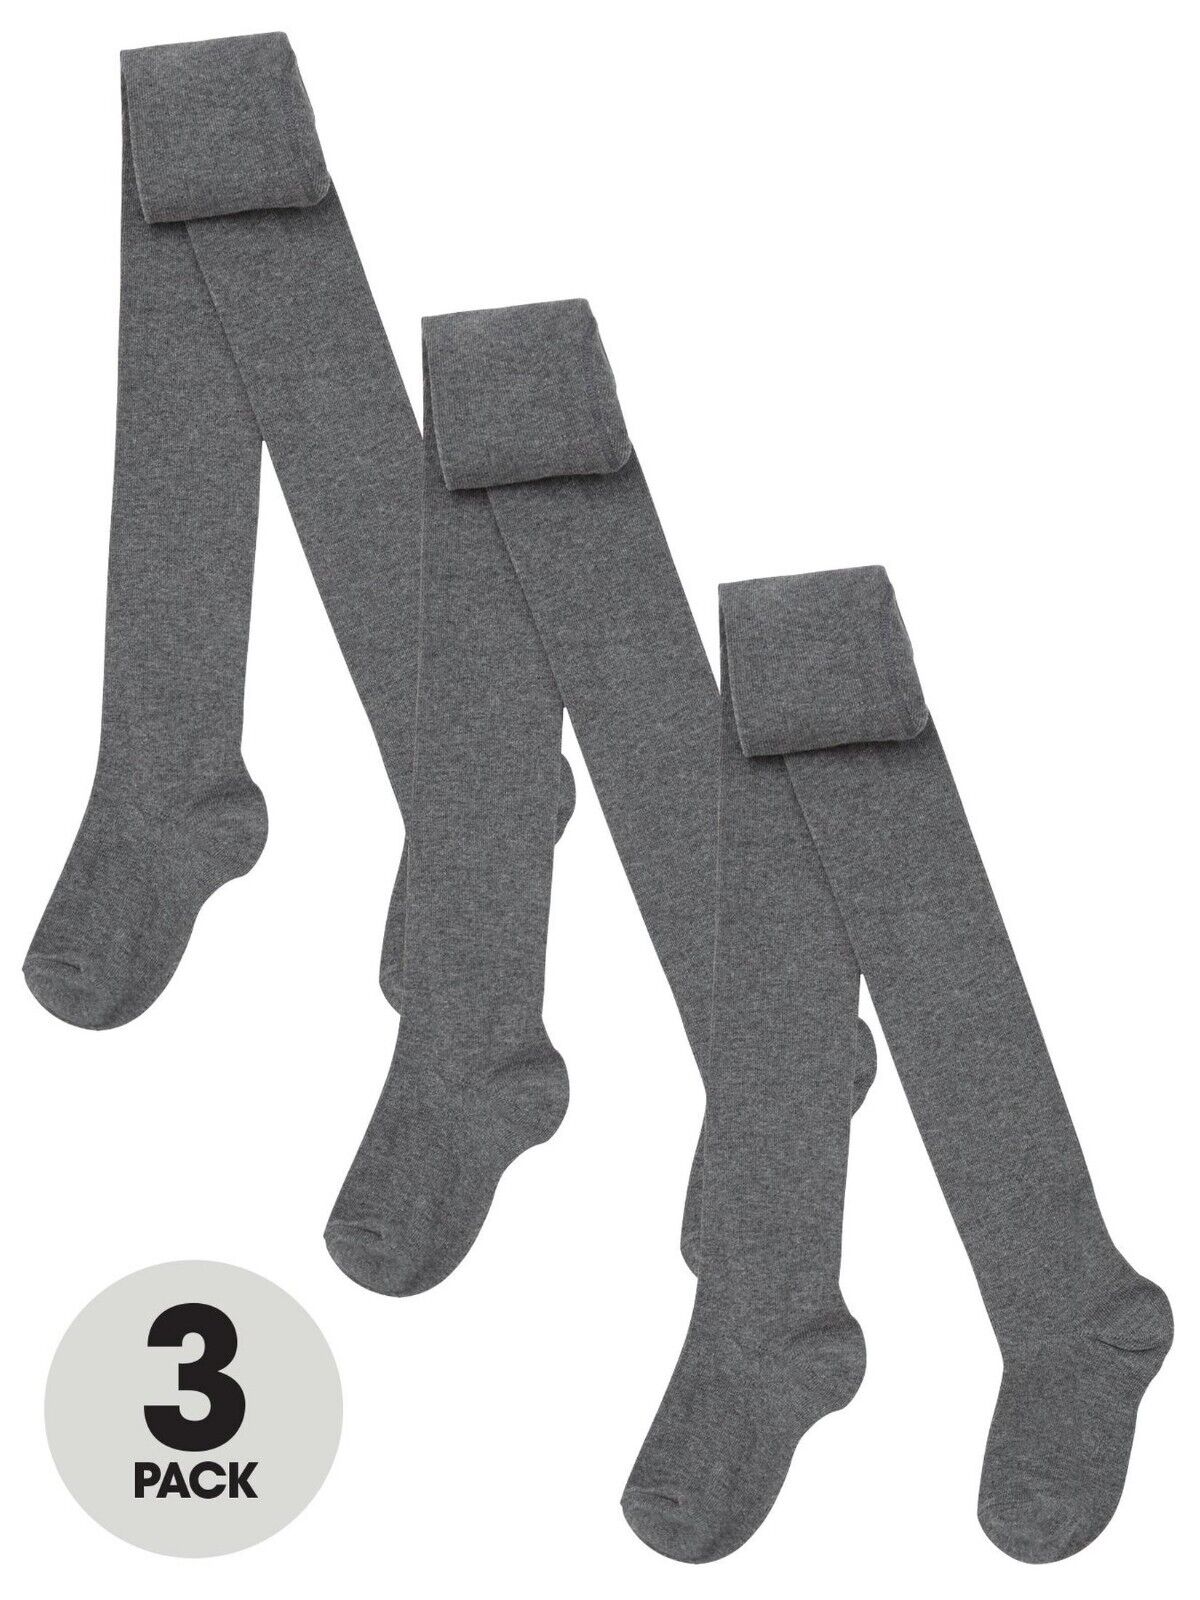 3 Pack Girls Flat Knit Tights - Grey. UK 9/10 Years